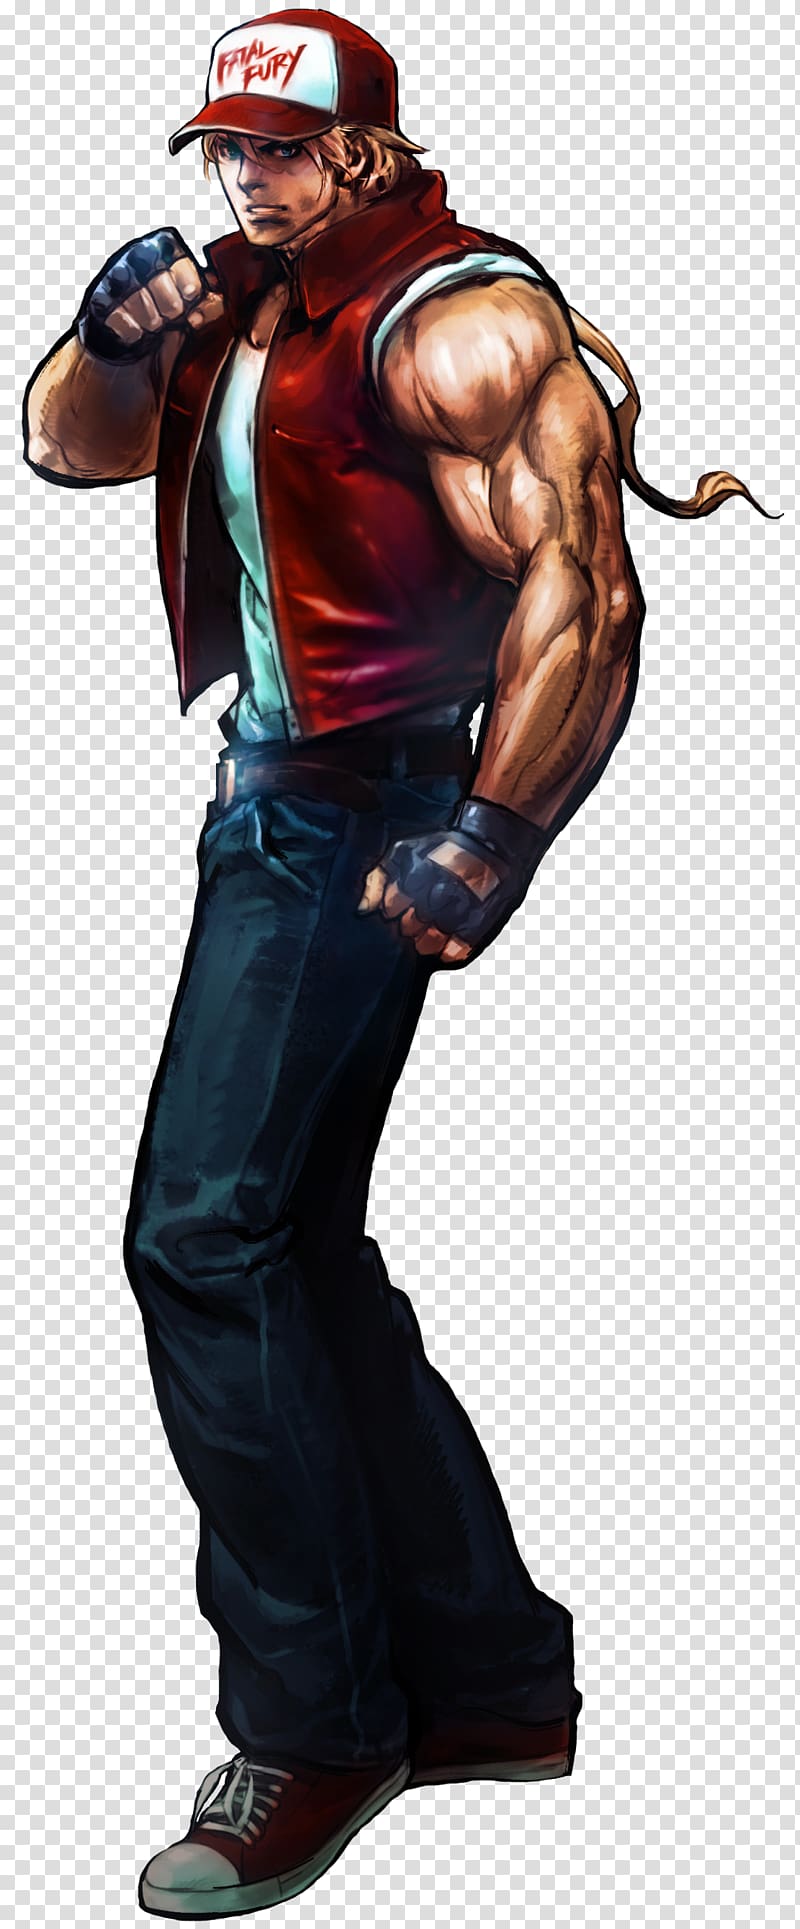 The King of Fighters XIII Terry Bogard Capcom vs. SNK: Millennium Fight 2000 Andy Bogard The King of Fighters 2002, king transparent background PNG clipart